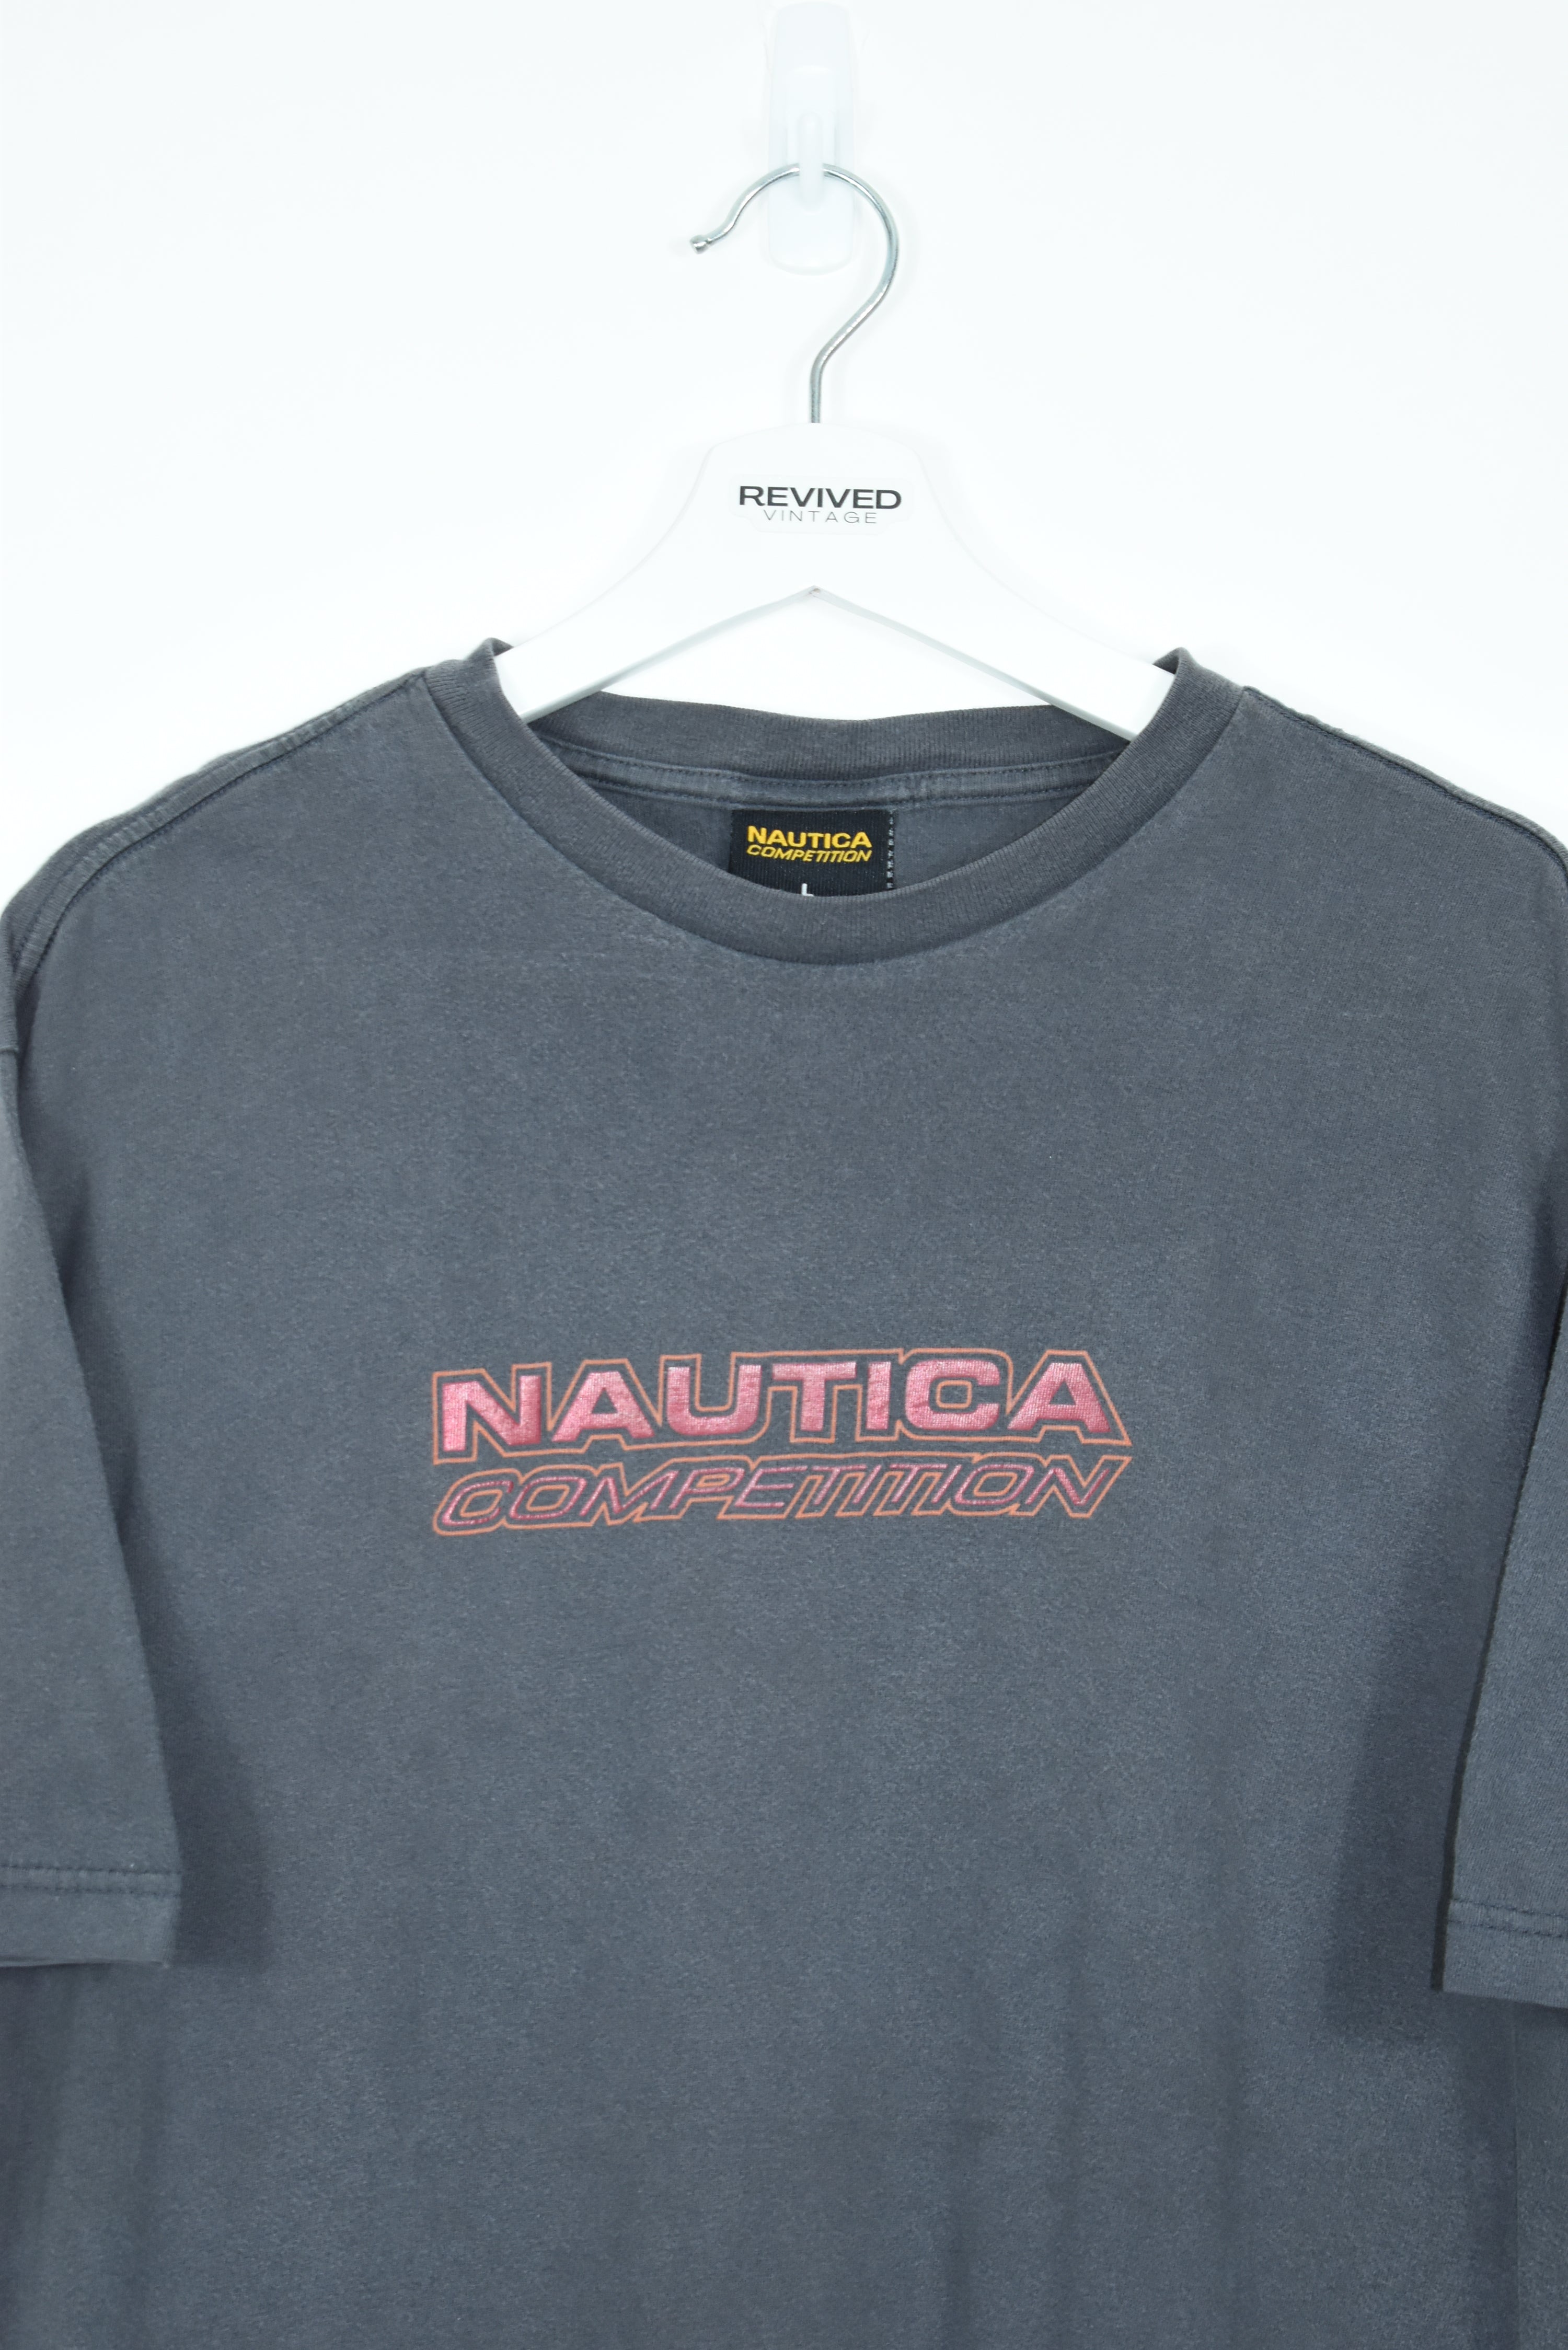 Vintage Nautica Competition Spellout T Shirt Dark Grey Large